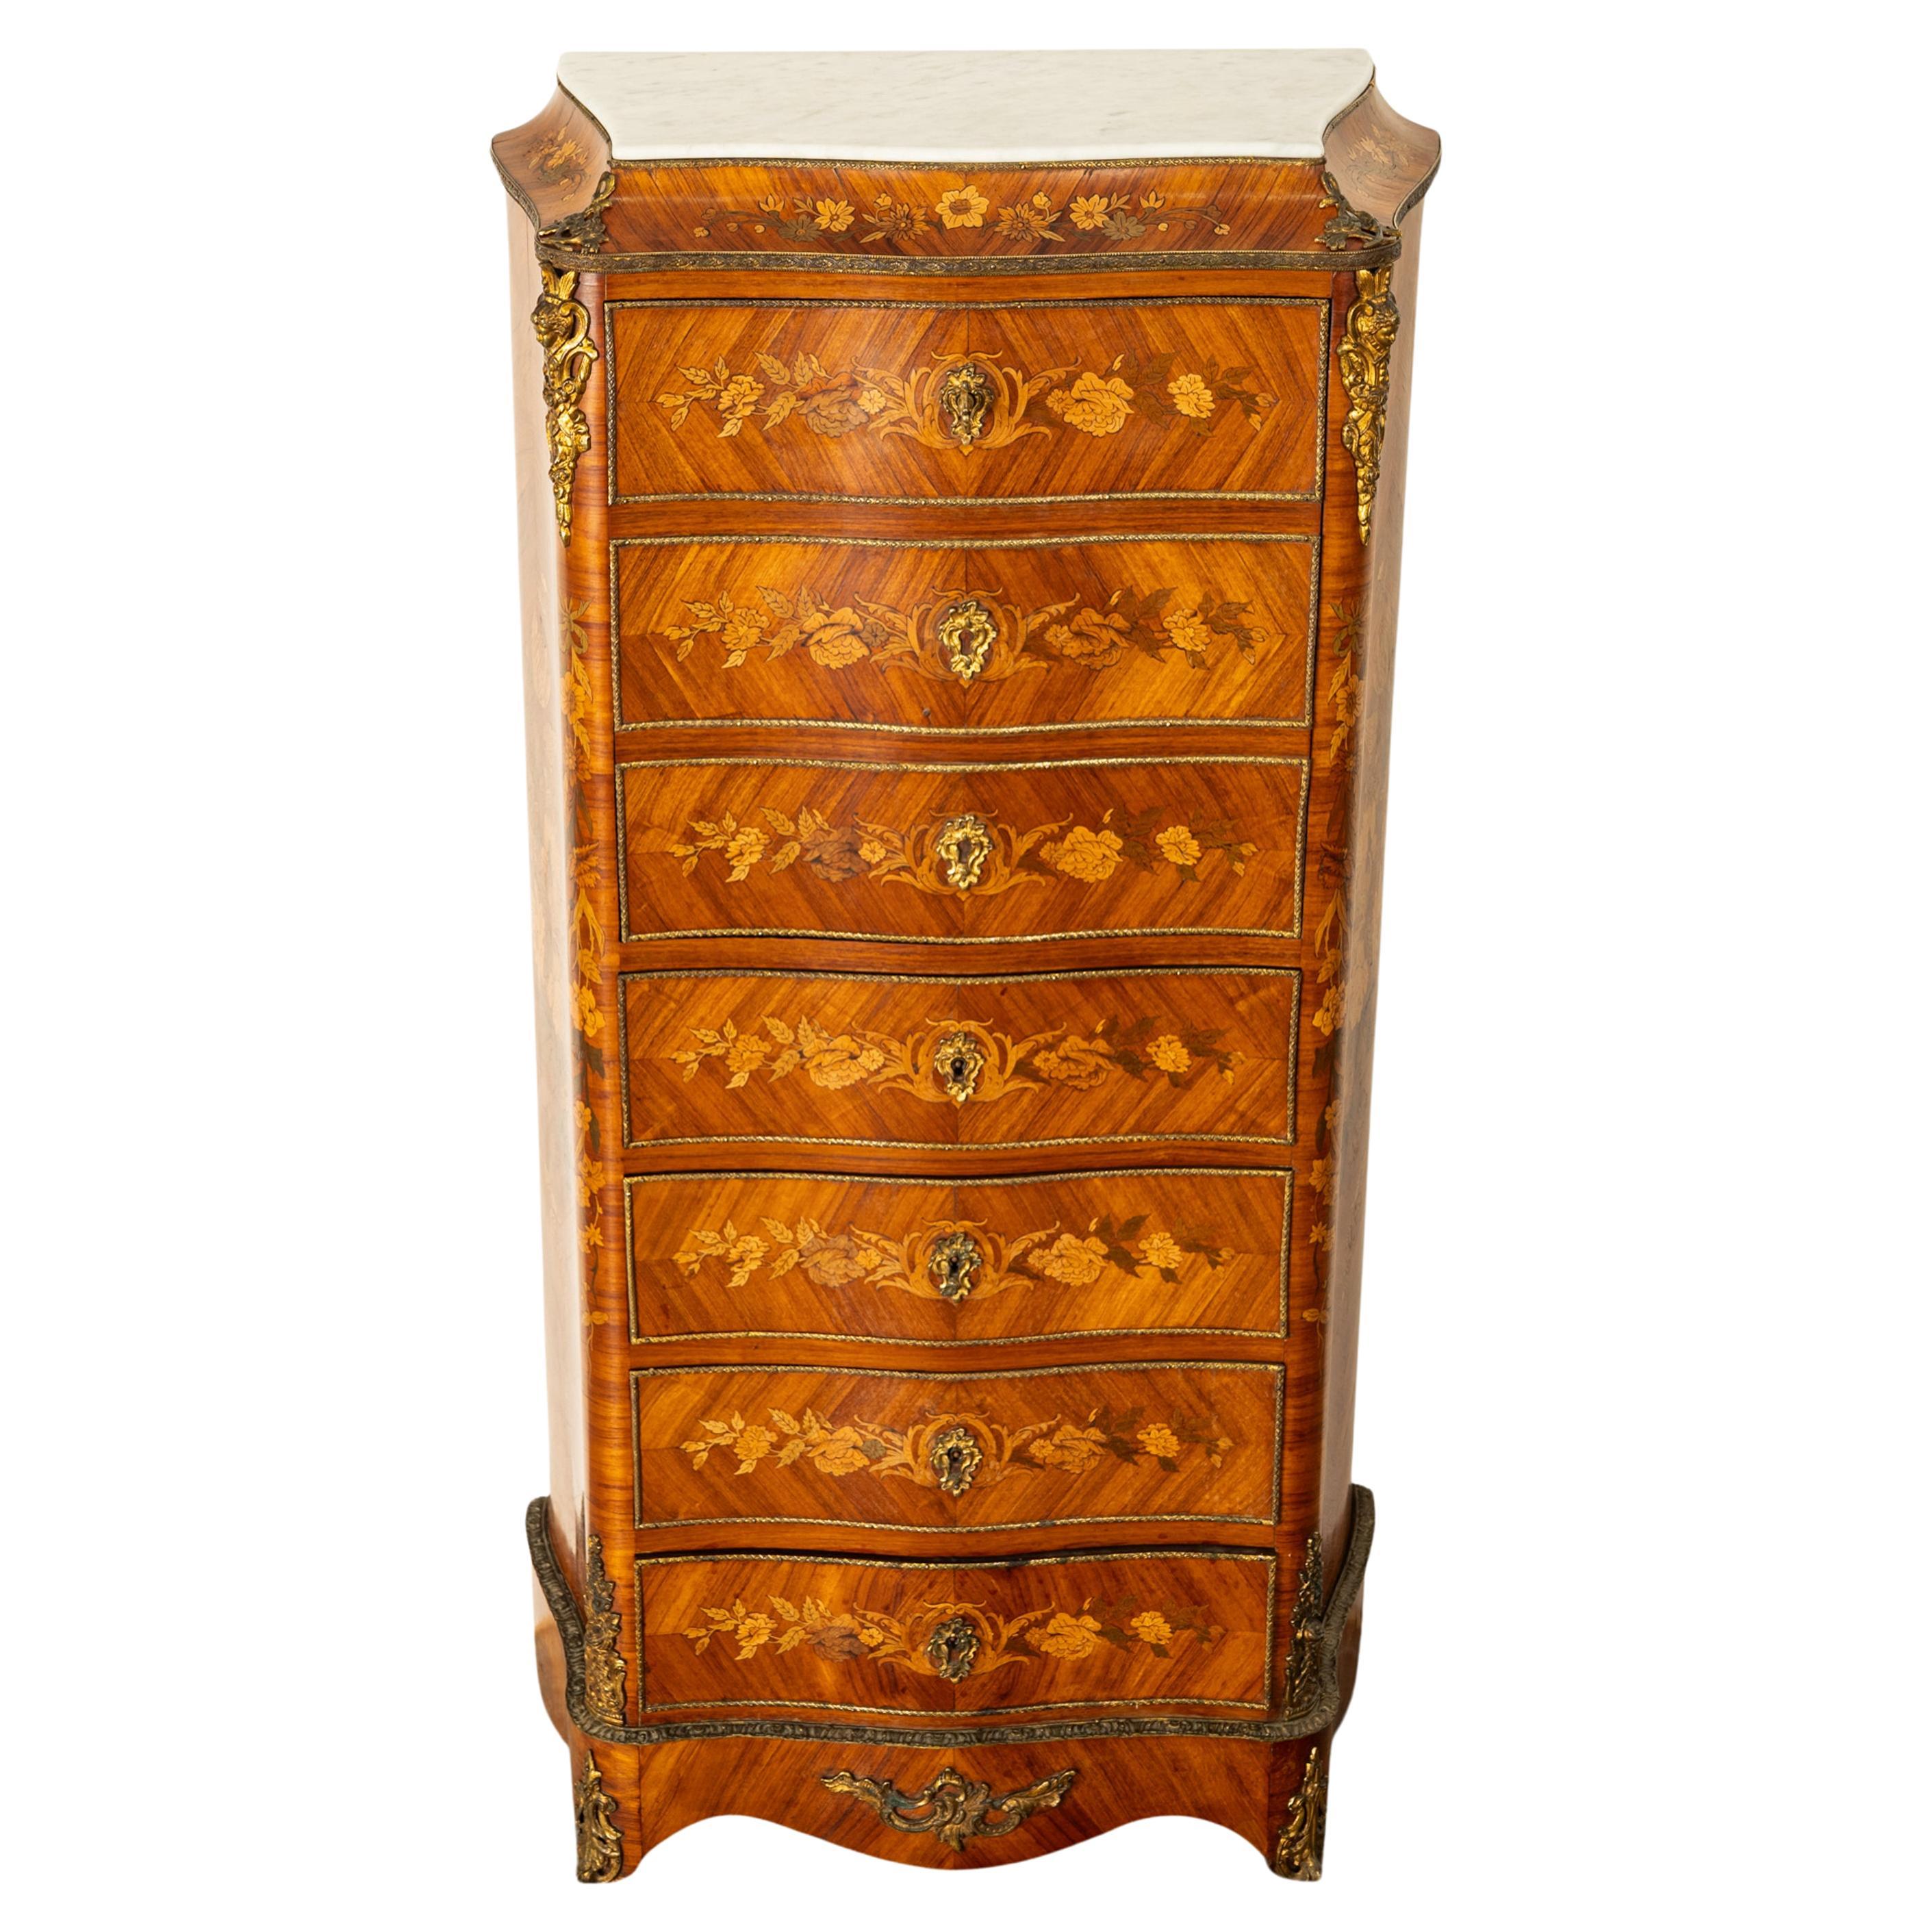 Fine Antique French Louis XV Marquetry Rosewood Ormolu Secretaire Abattant 1880 For Sale